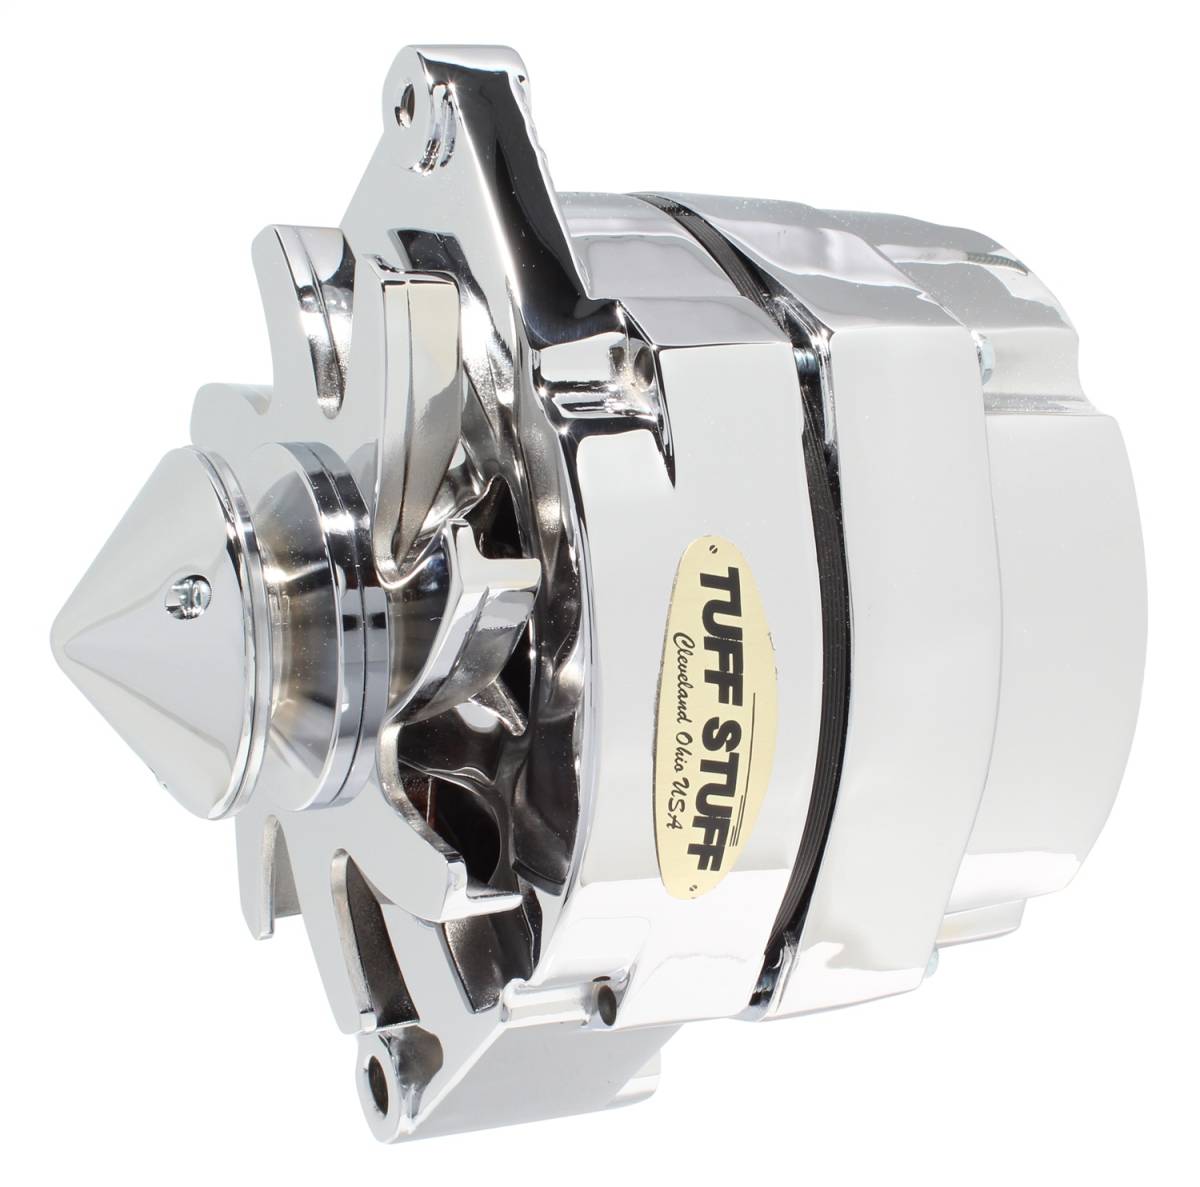 Tuff Stuff Performance - Silver Bullet Alternator 140 AMP OEM Or 1 Wire V Groove Bullet Pulley 4.85 in. Case Depth Lower Mount Boss 2 in. Long Polished 6 Clocking 7140BBULL6